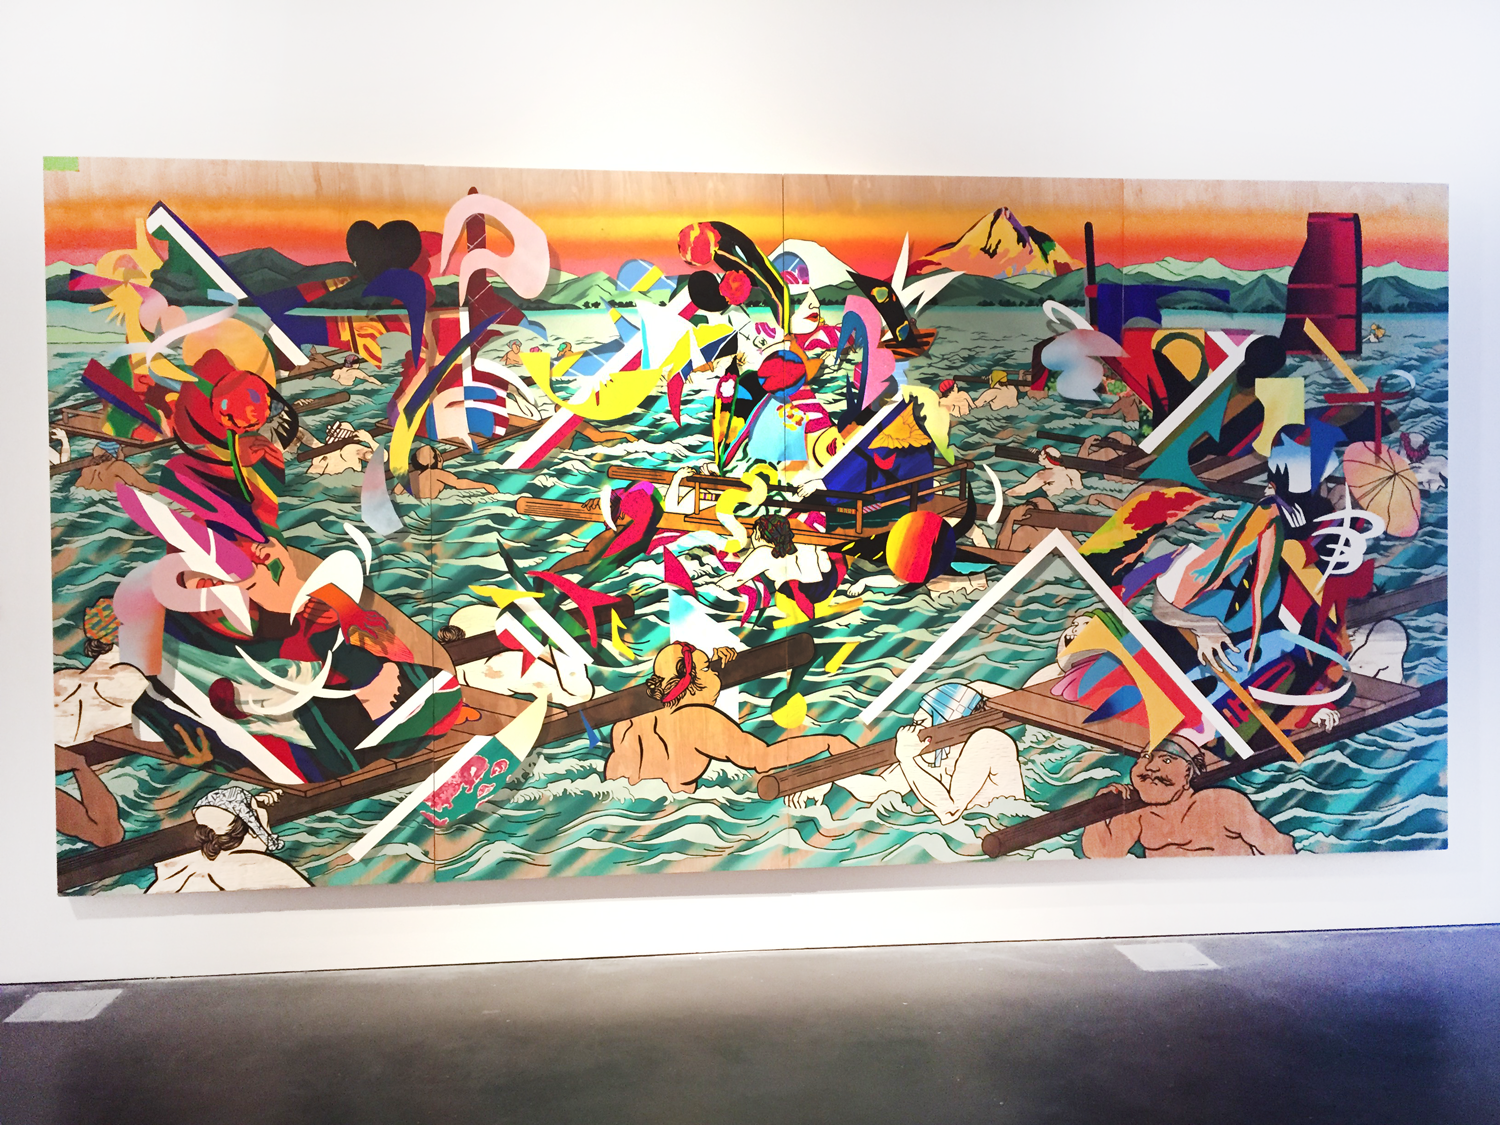 Installation of a large painting depicting a sunset glowing over mountains in the background. In the foreground, a ship wreck has occurred and abstracted humans struggles to stay above water.